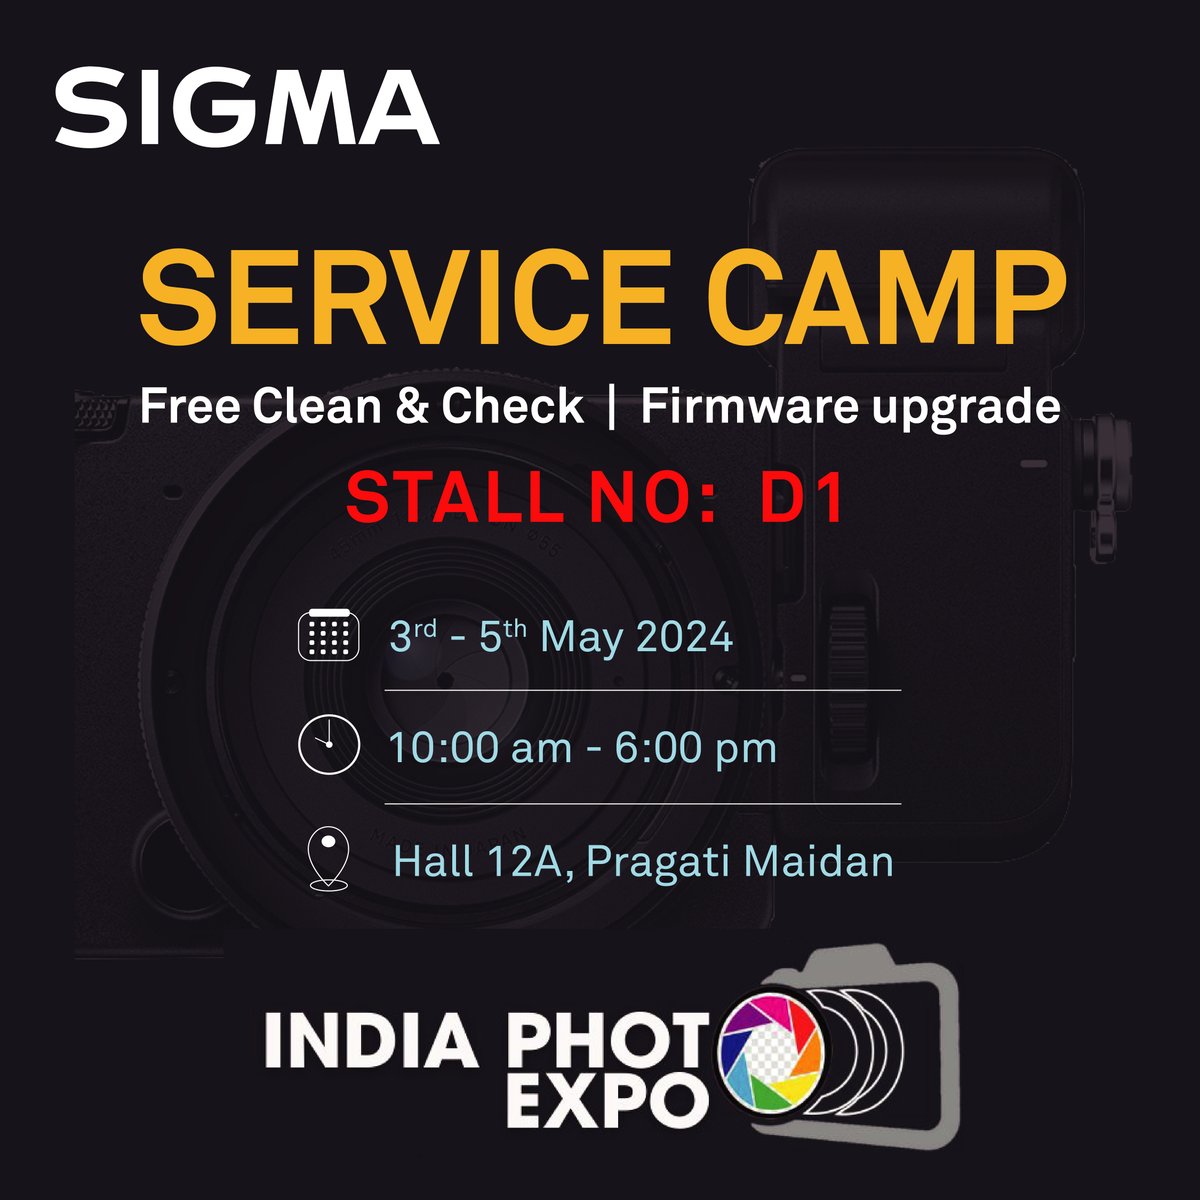 SIGMA invites you to our free clean, check, and firmware updates Service Camp at India Photo Expo. Stop by Hall 12A, Pragati Maidan, New Delhi from 3rd - 5th May 2024 don't miss out! #SIGMA #SIGMAlenses #SIGMAPhotoIndia #ServiceCamp